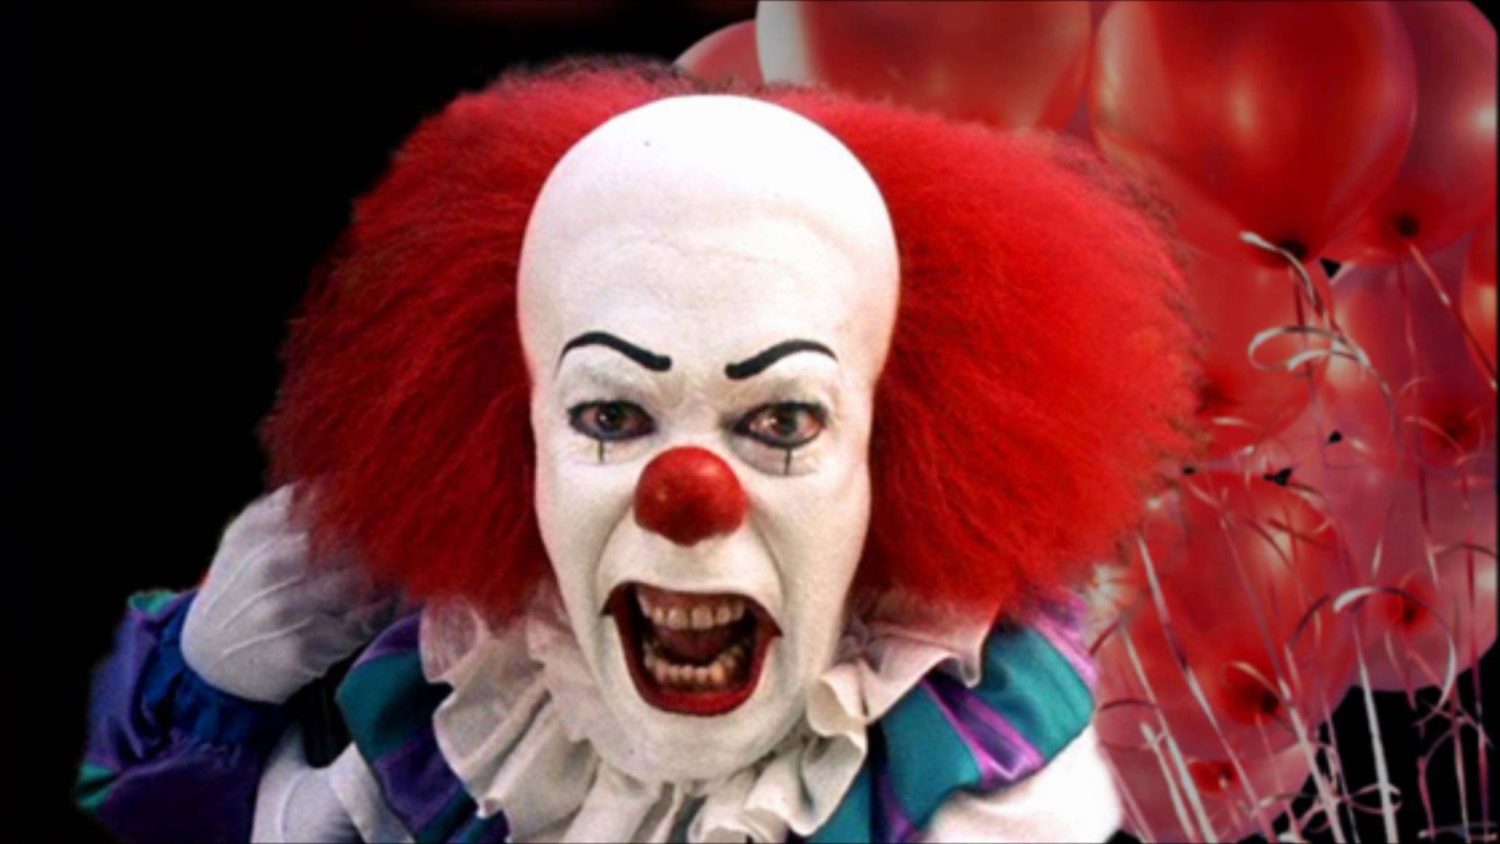 Stephen King's It coming to the big screen.